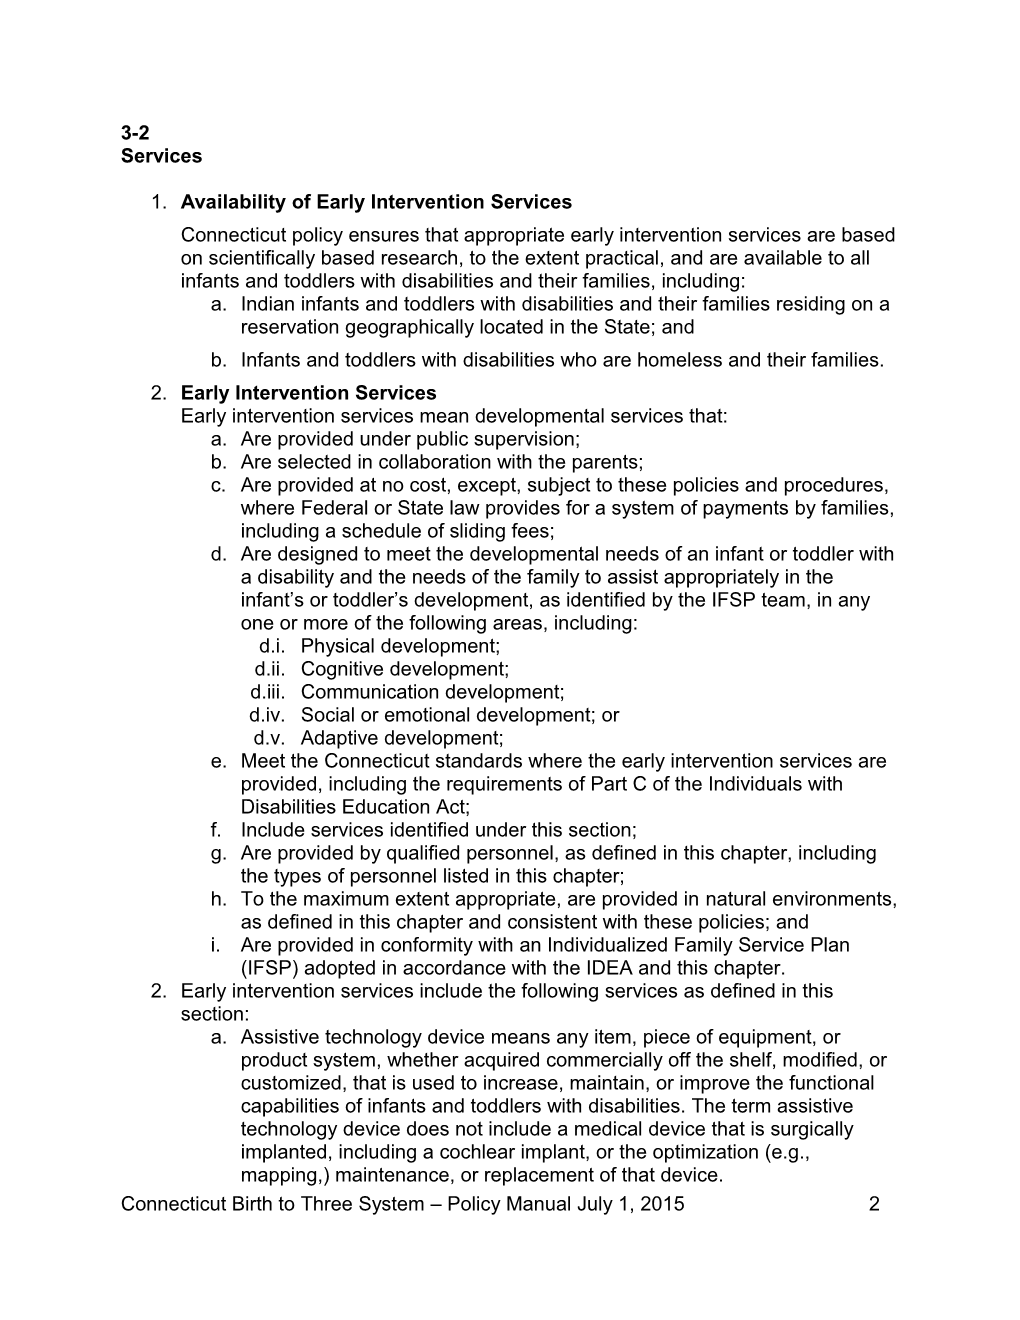 Chapter 3: Early Intervention Services